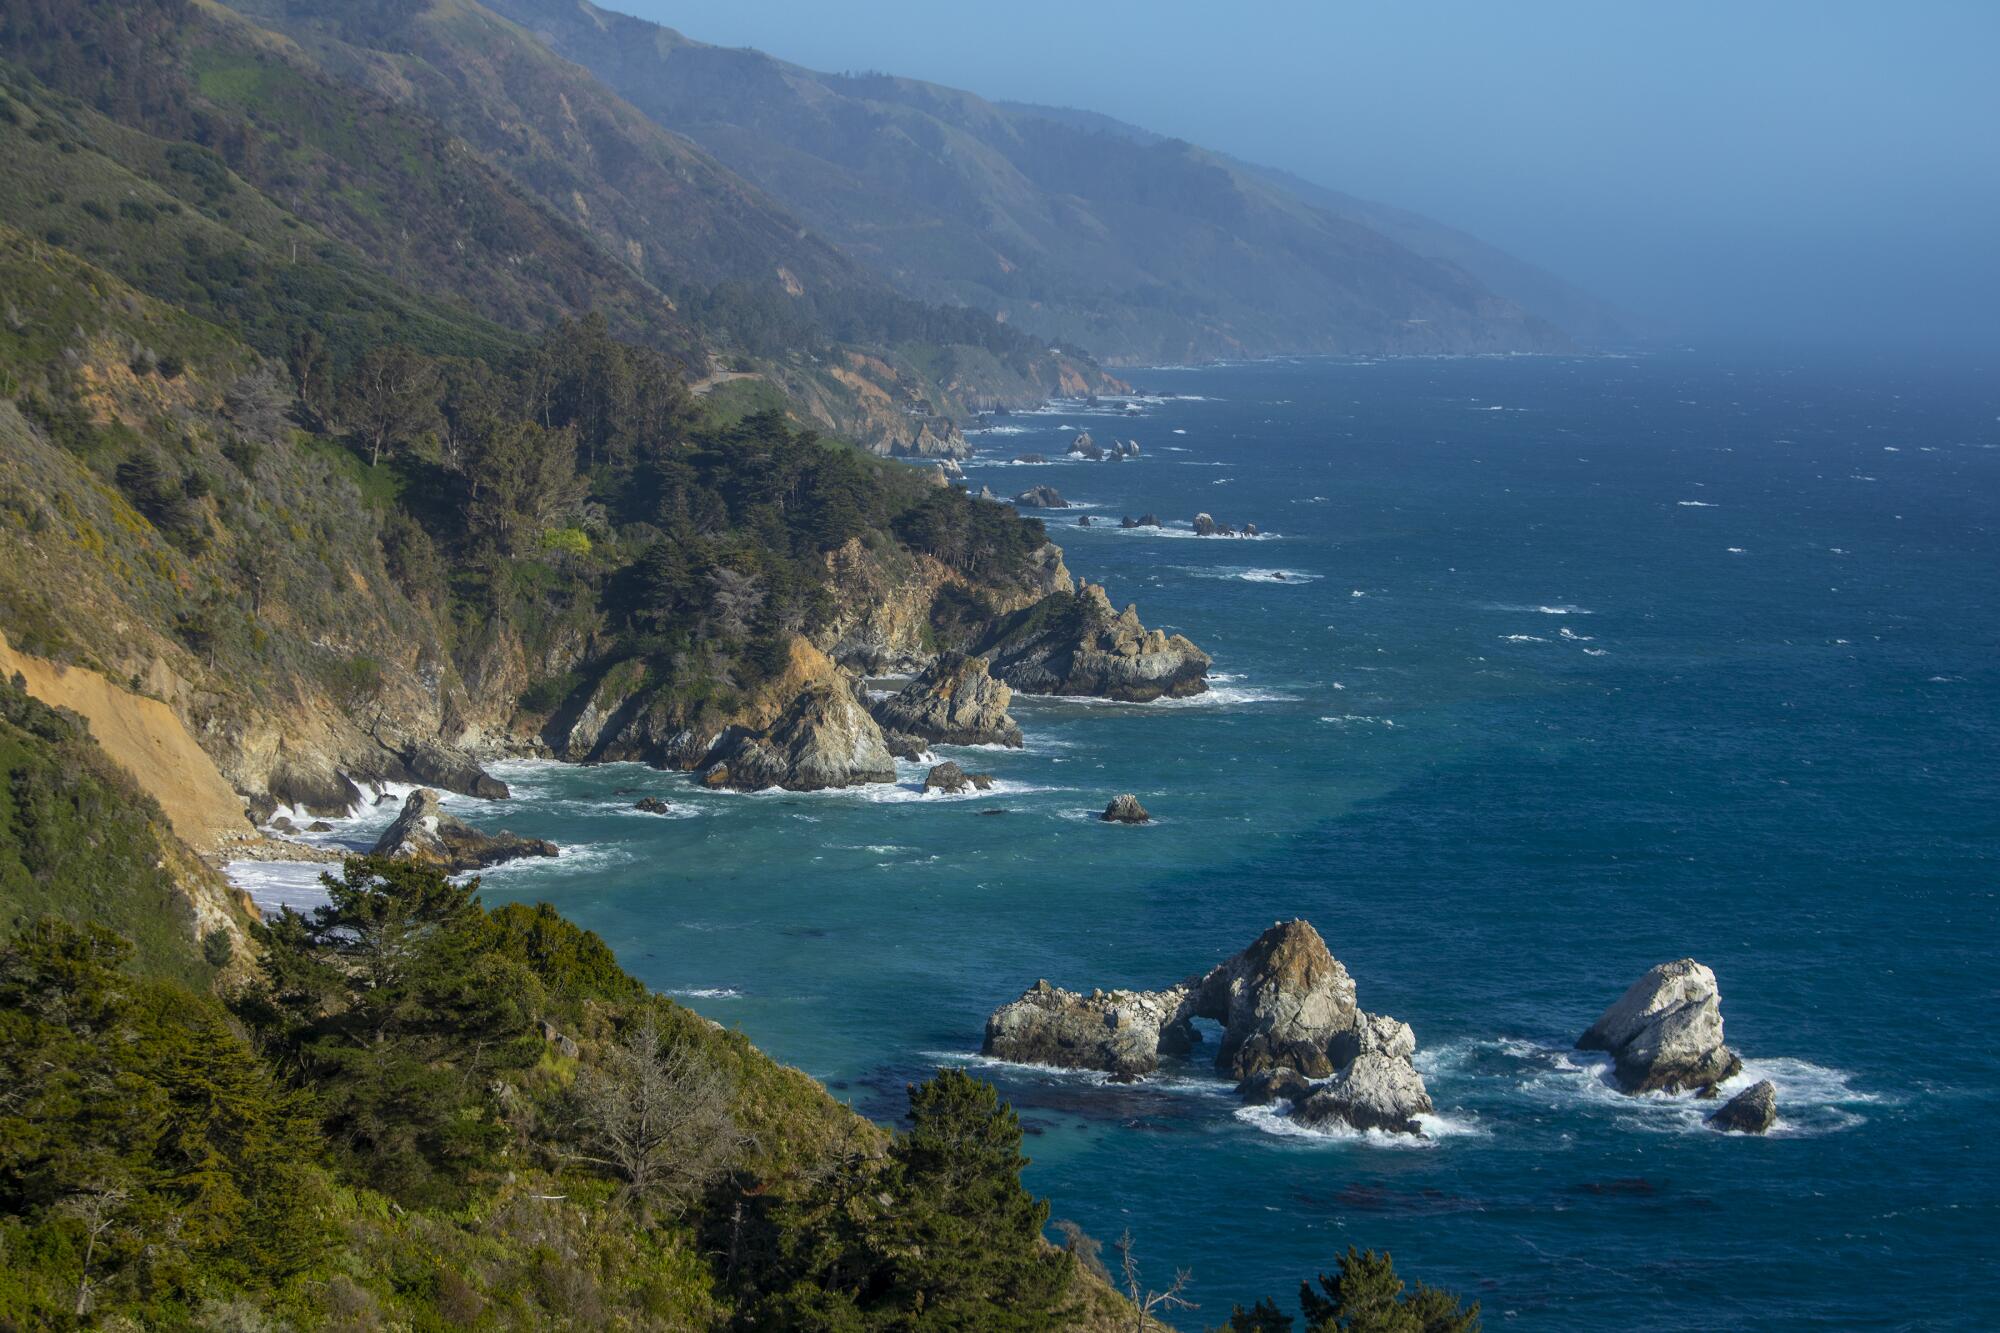 A long stretch of rocky, tree-covered coastline is met by blue-green waters and misty blue sky.  